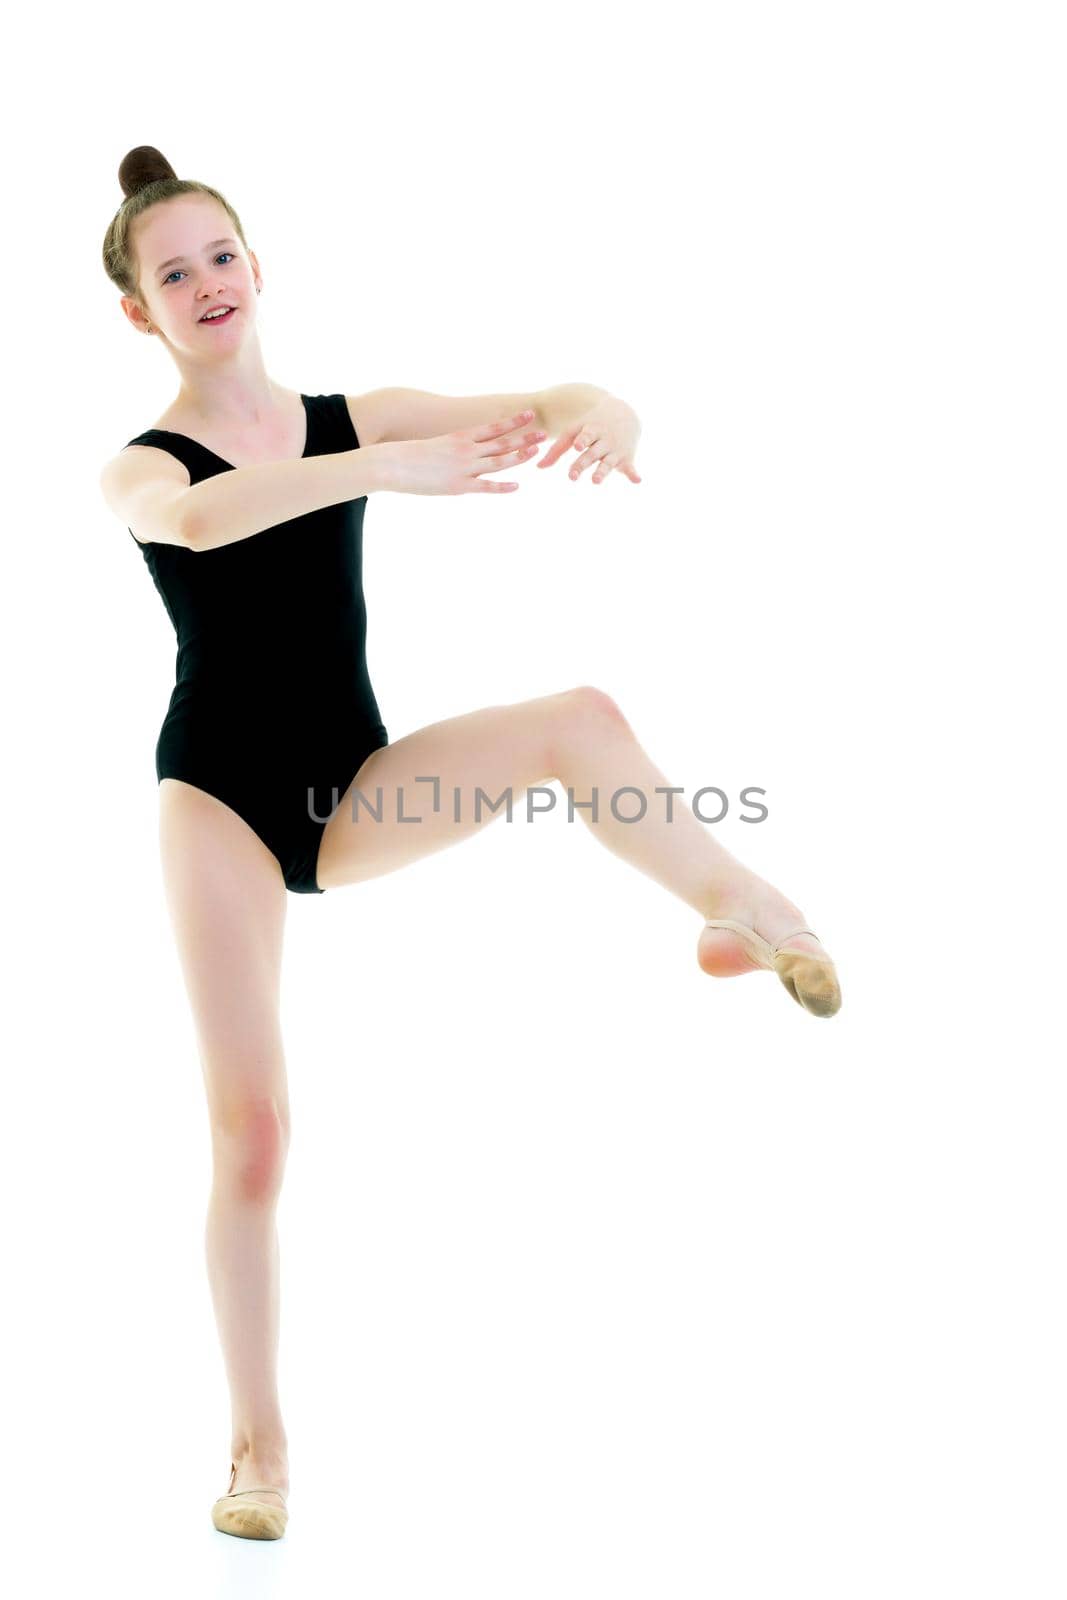 A girl gymnast performs an acrobatic element. The concept of childhood, sport, healthy lifestyle. Isolated on white background.